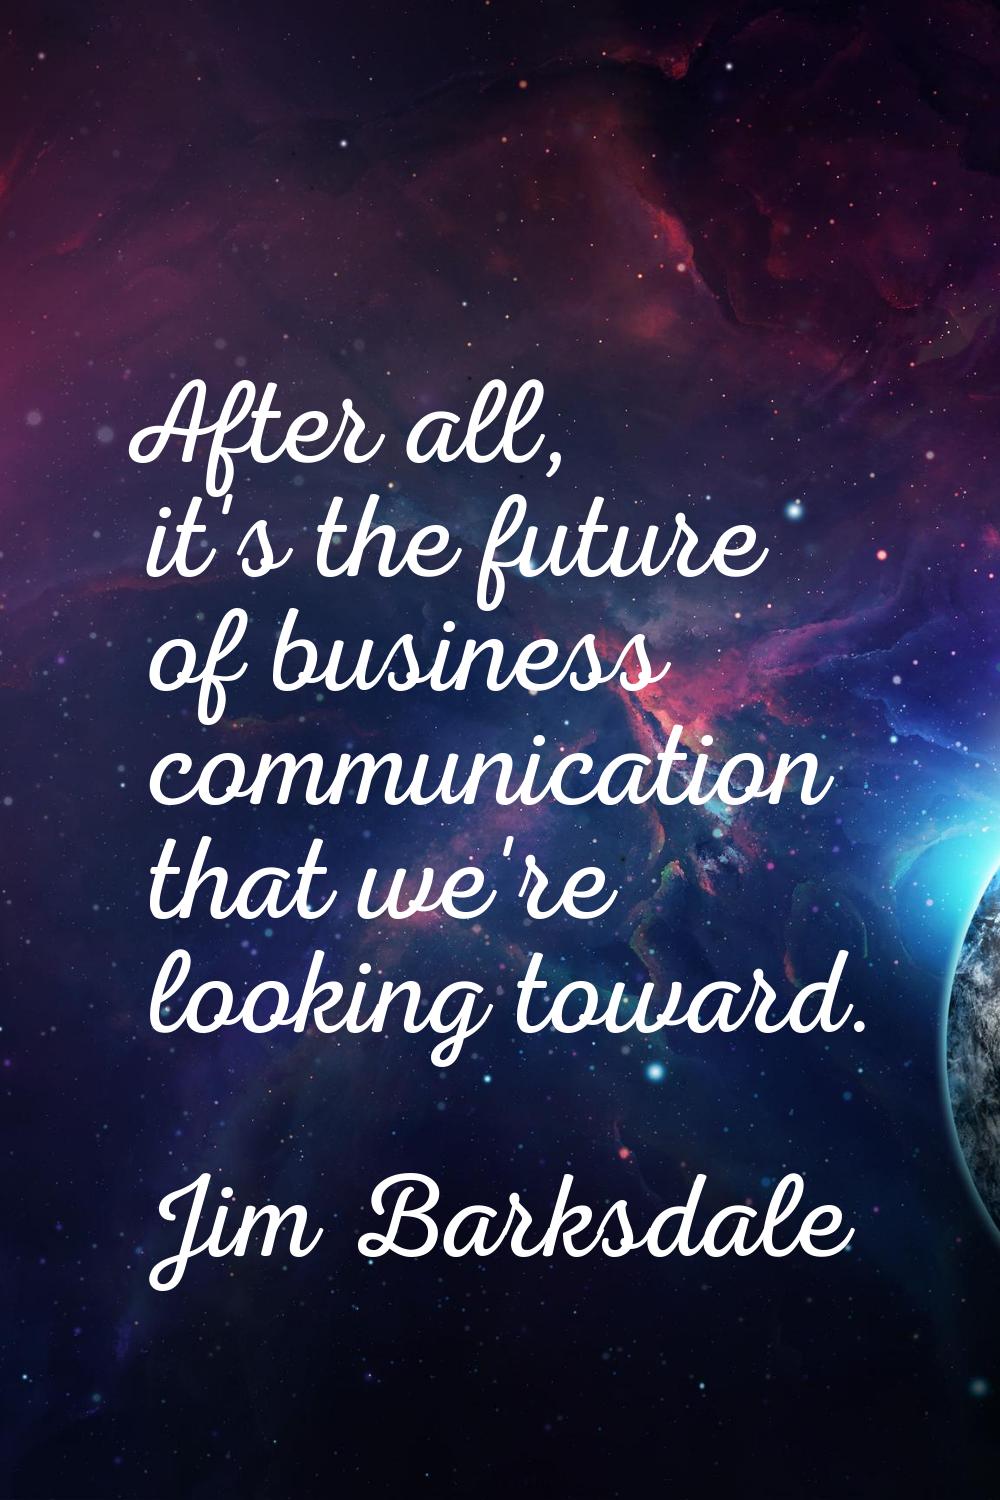 After all, it's the future of business communication that we're looking toward.